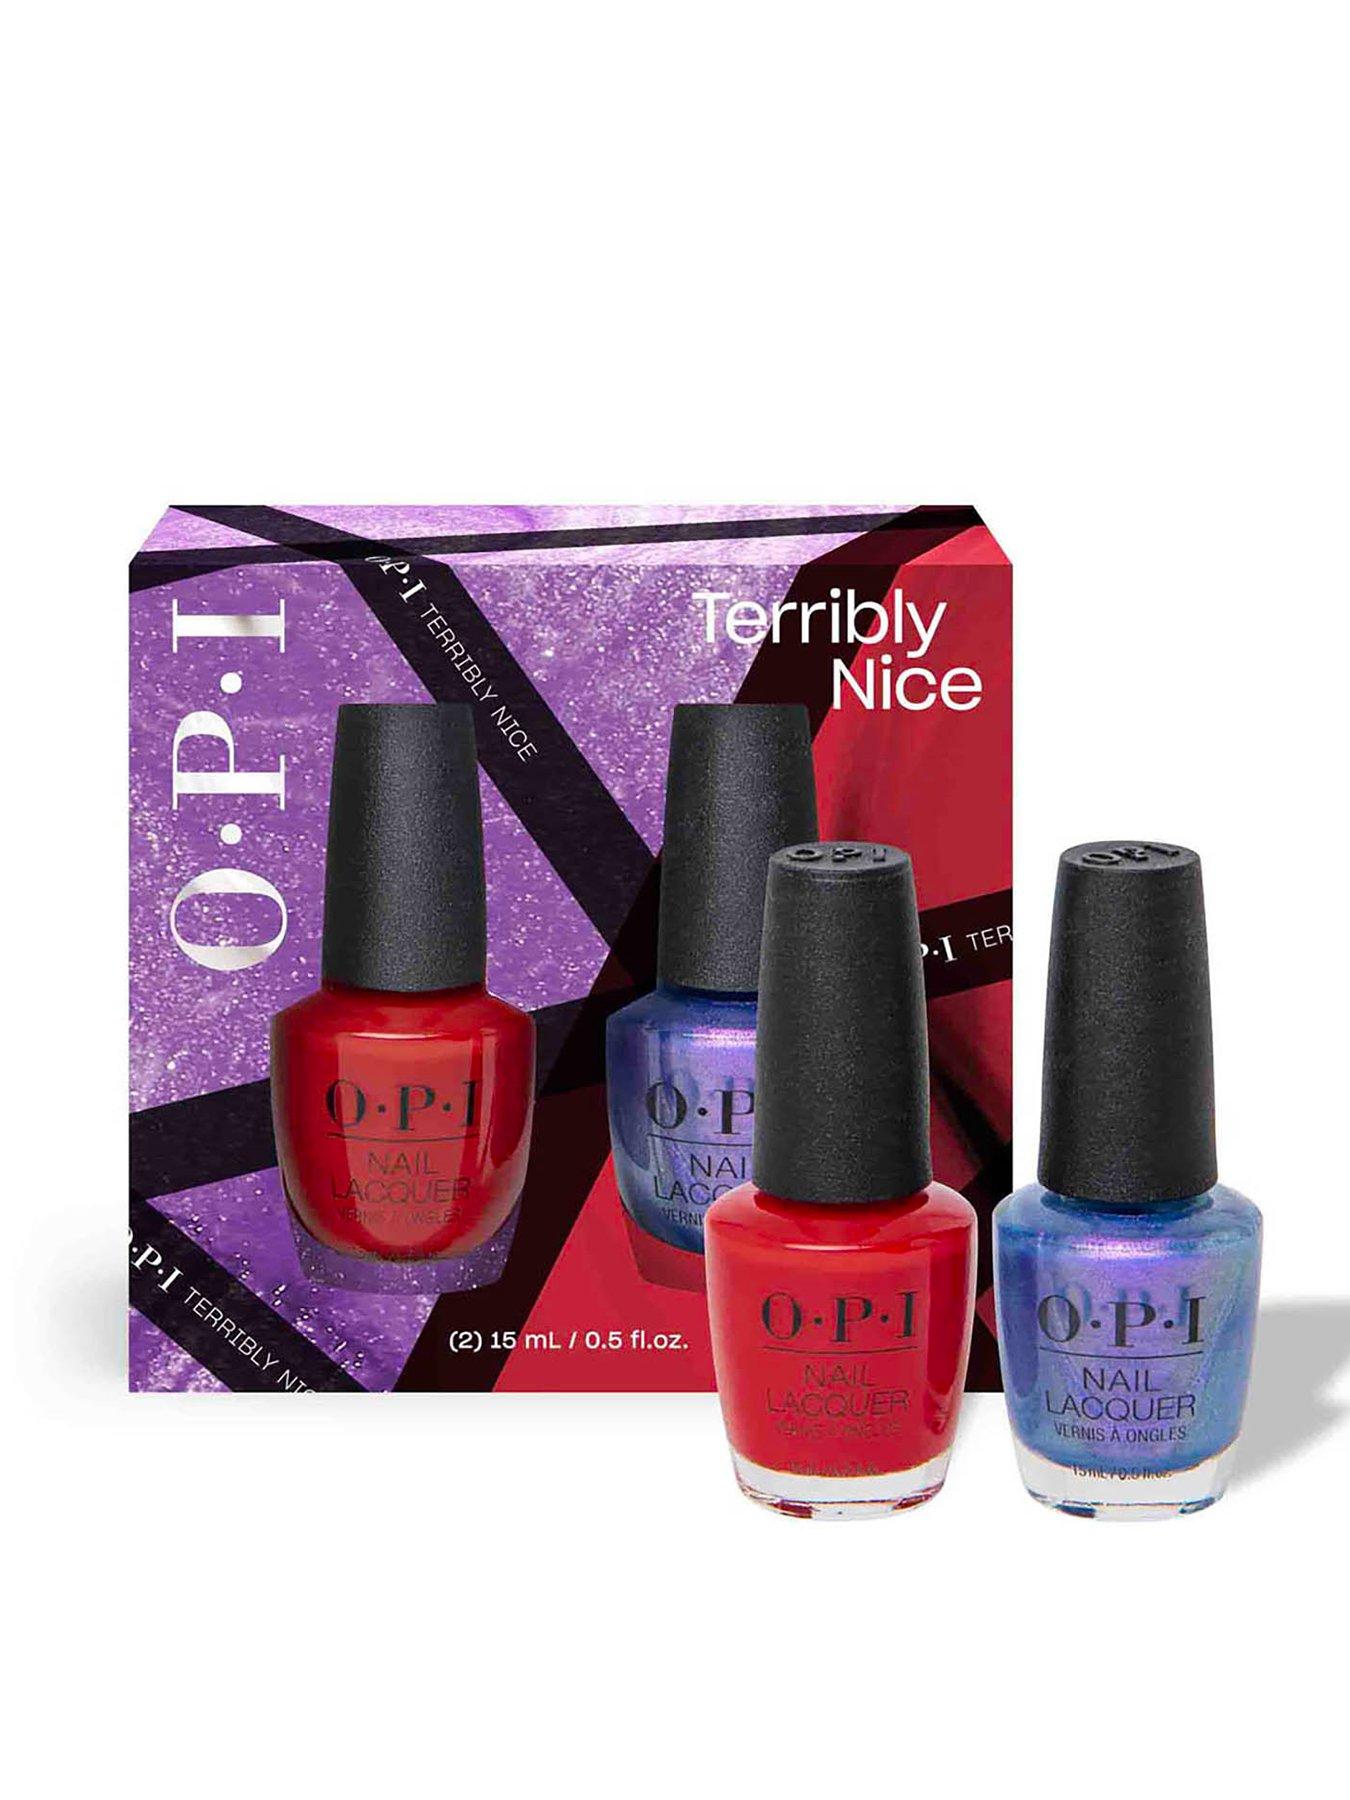 OPI Terribly Nice Holiday Collection, Nail Lacquer Duo Pack 2 x 15ml ...